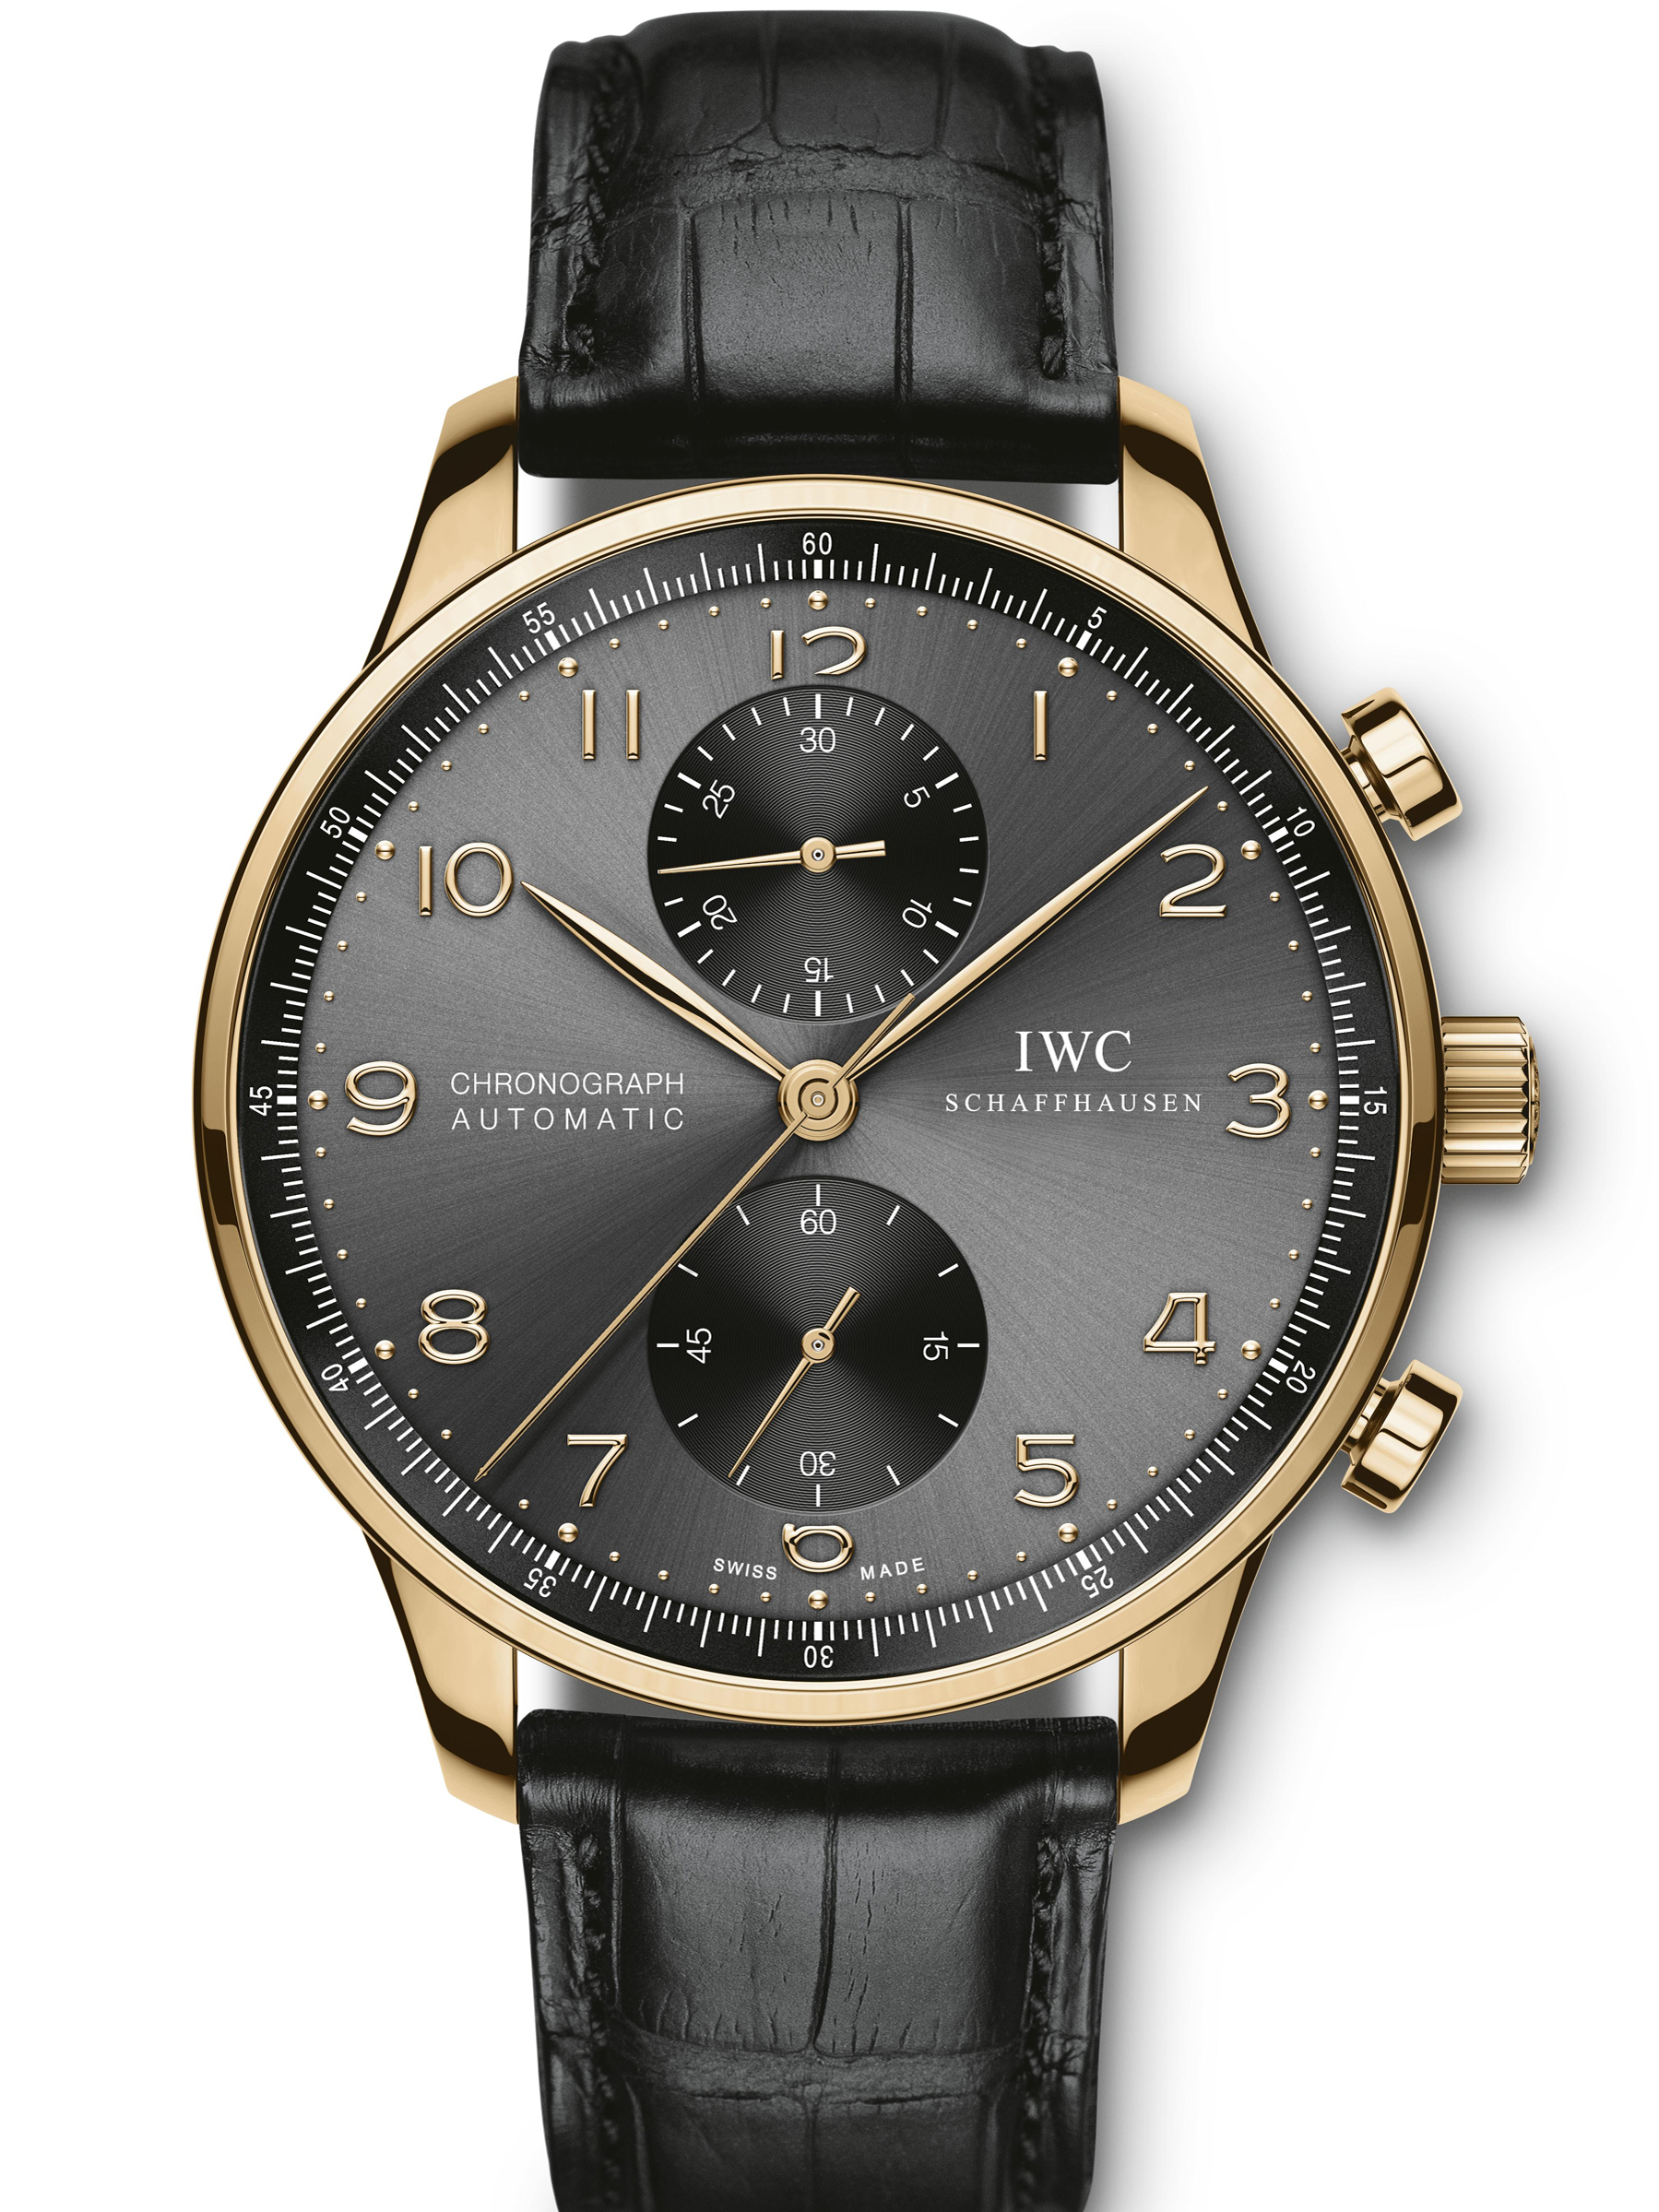 He was wearing the IWC Portugieser Chronograph (IW371482)